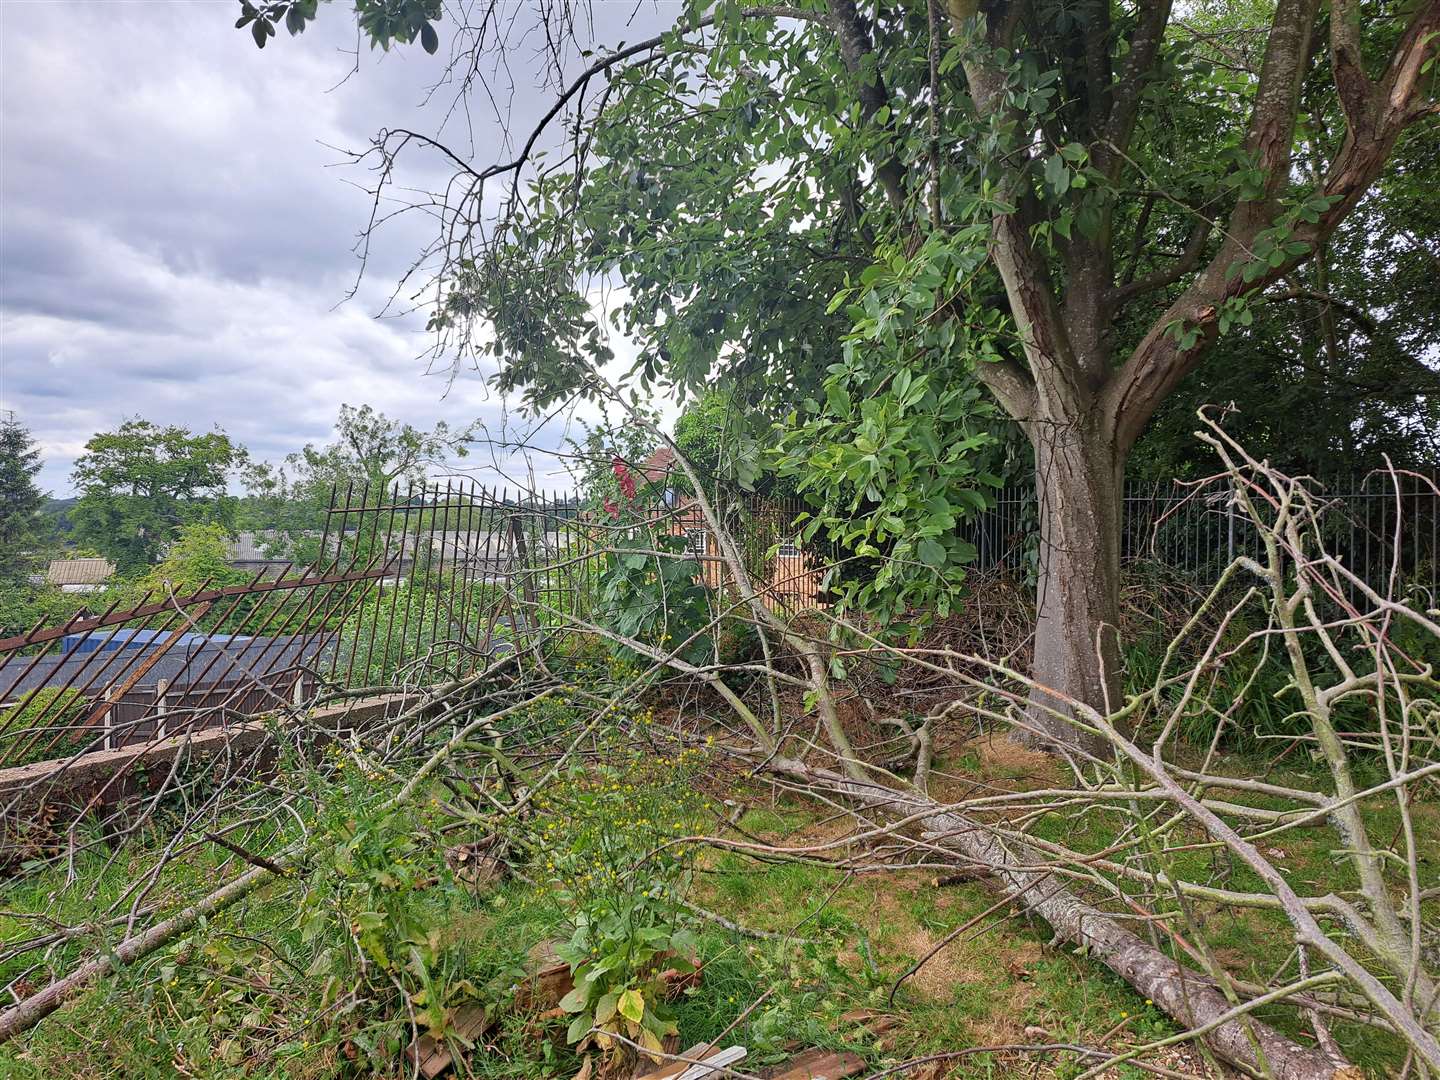 The trees were hit by Storm Eunice in February and have been 'left to rot'